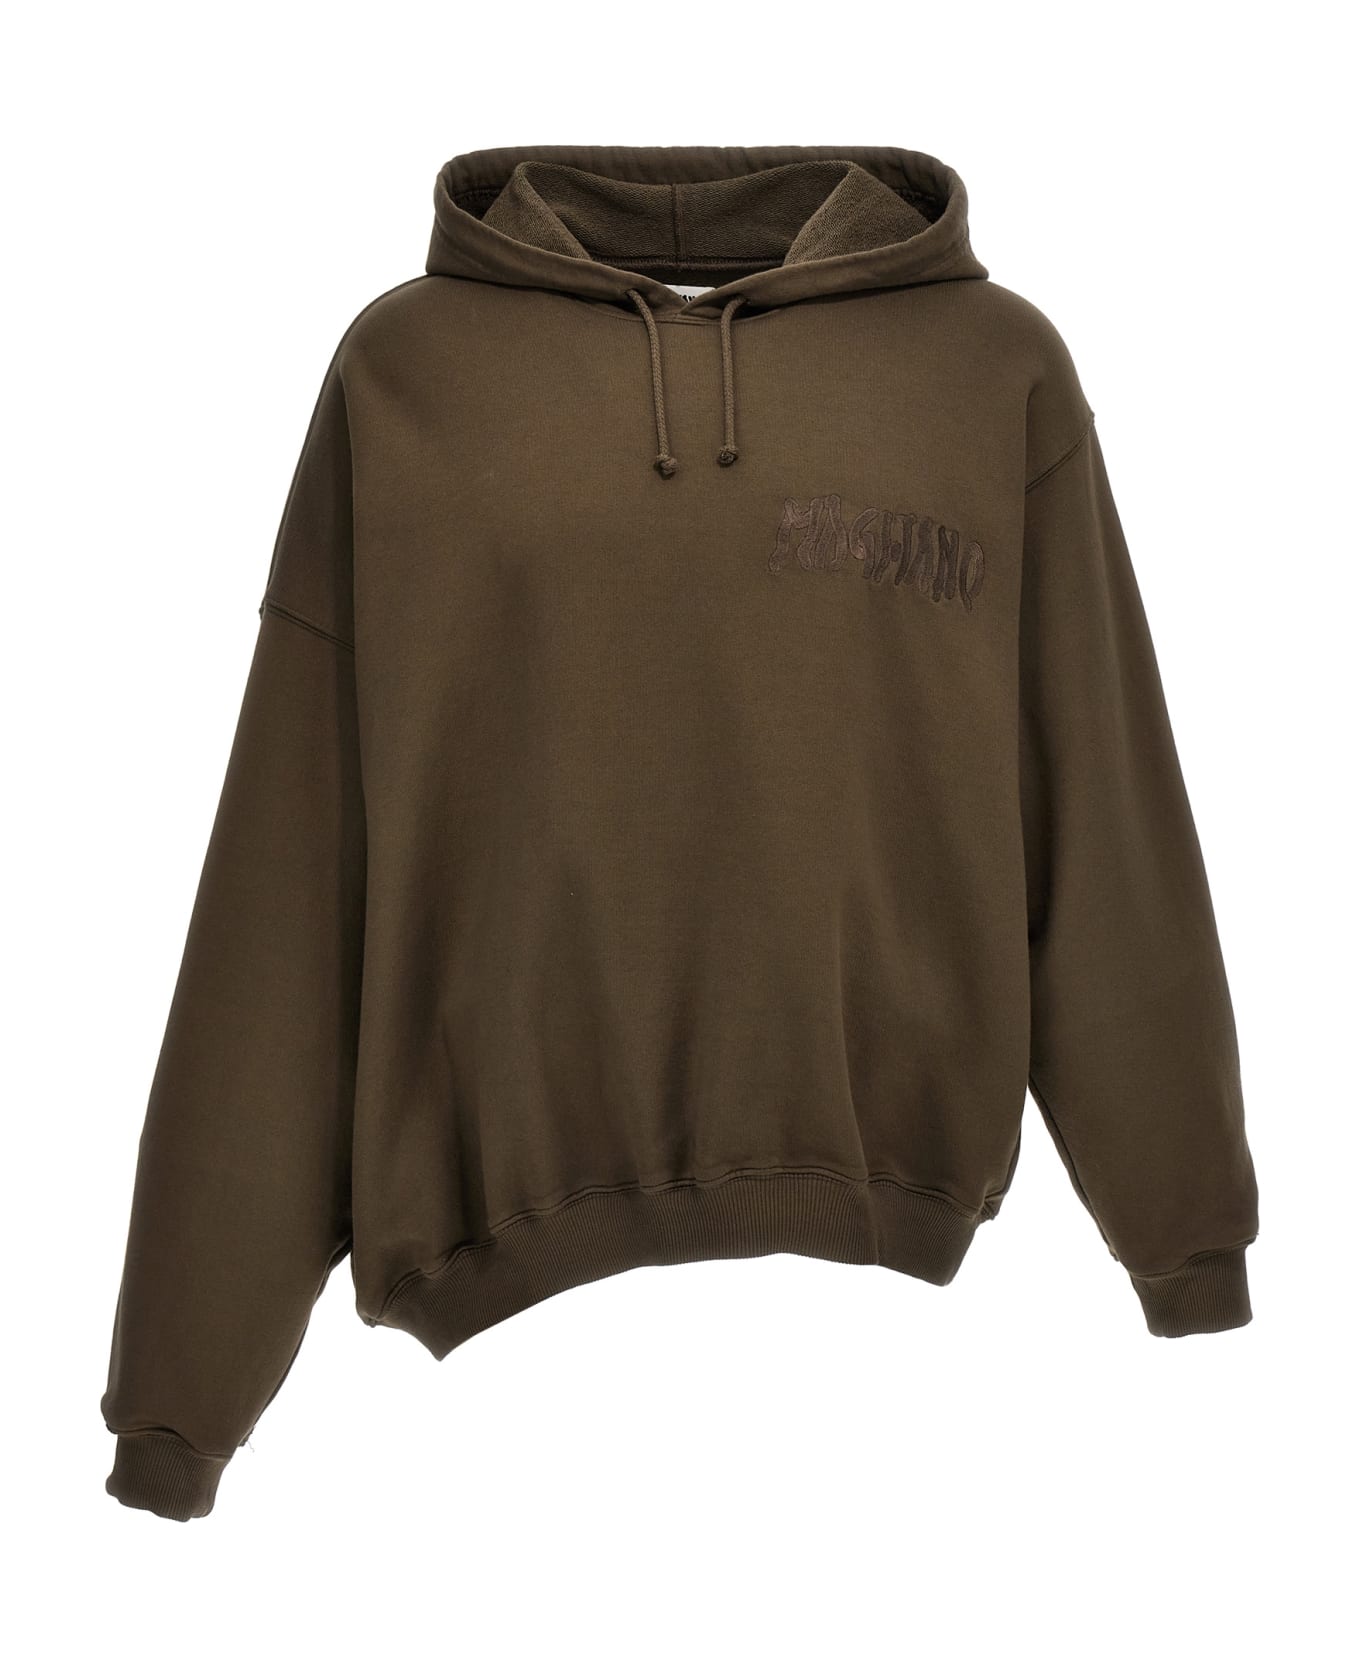 Magliano 'twisted' Hoodie - Brown フリース